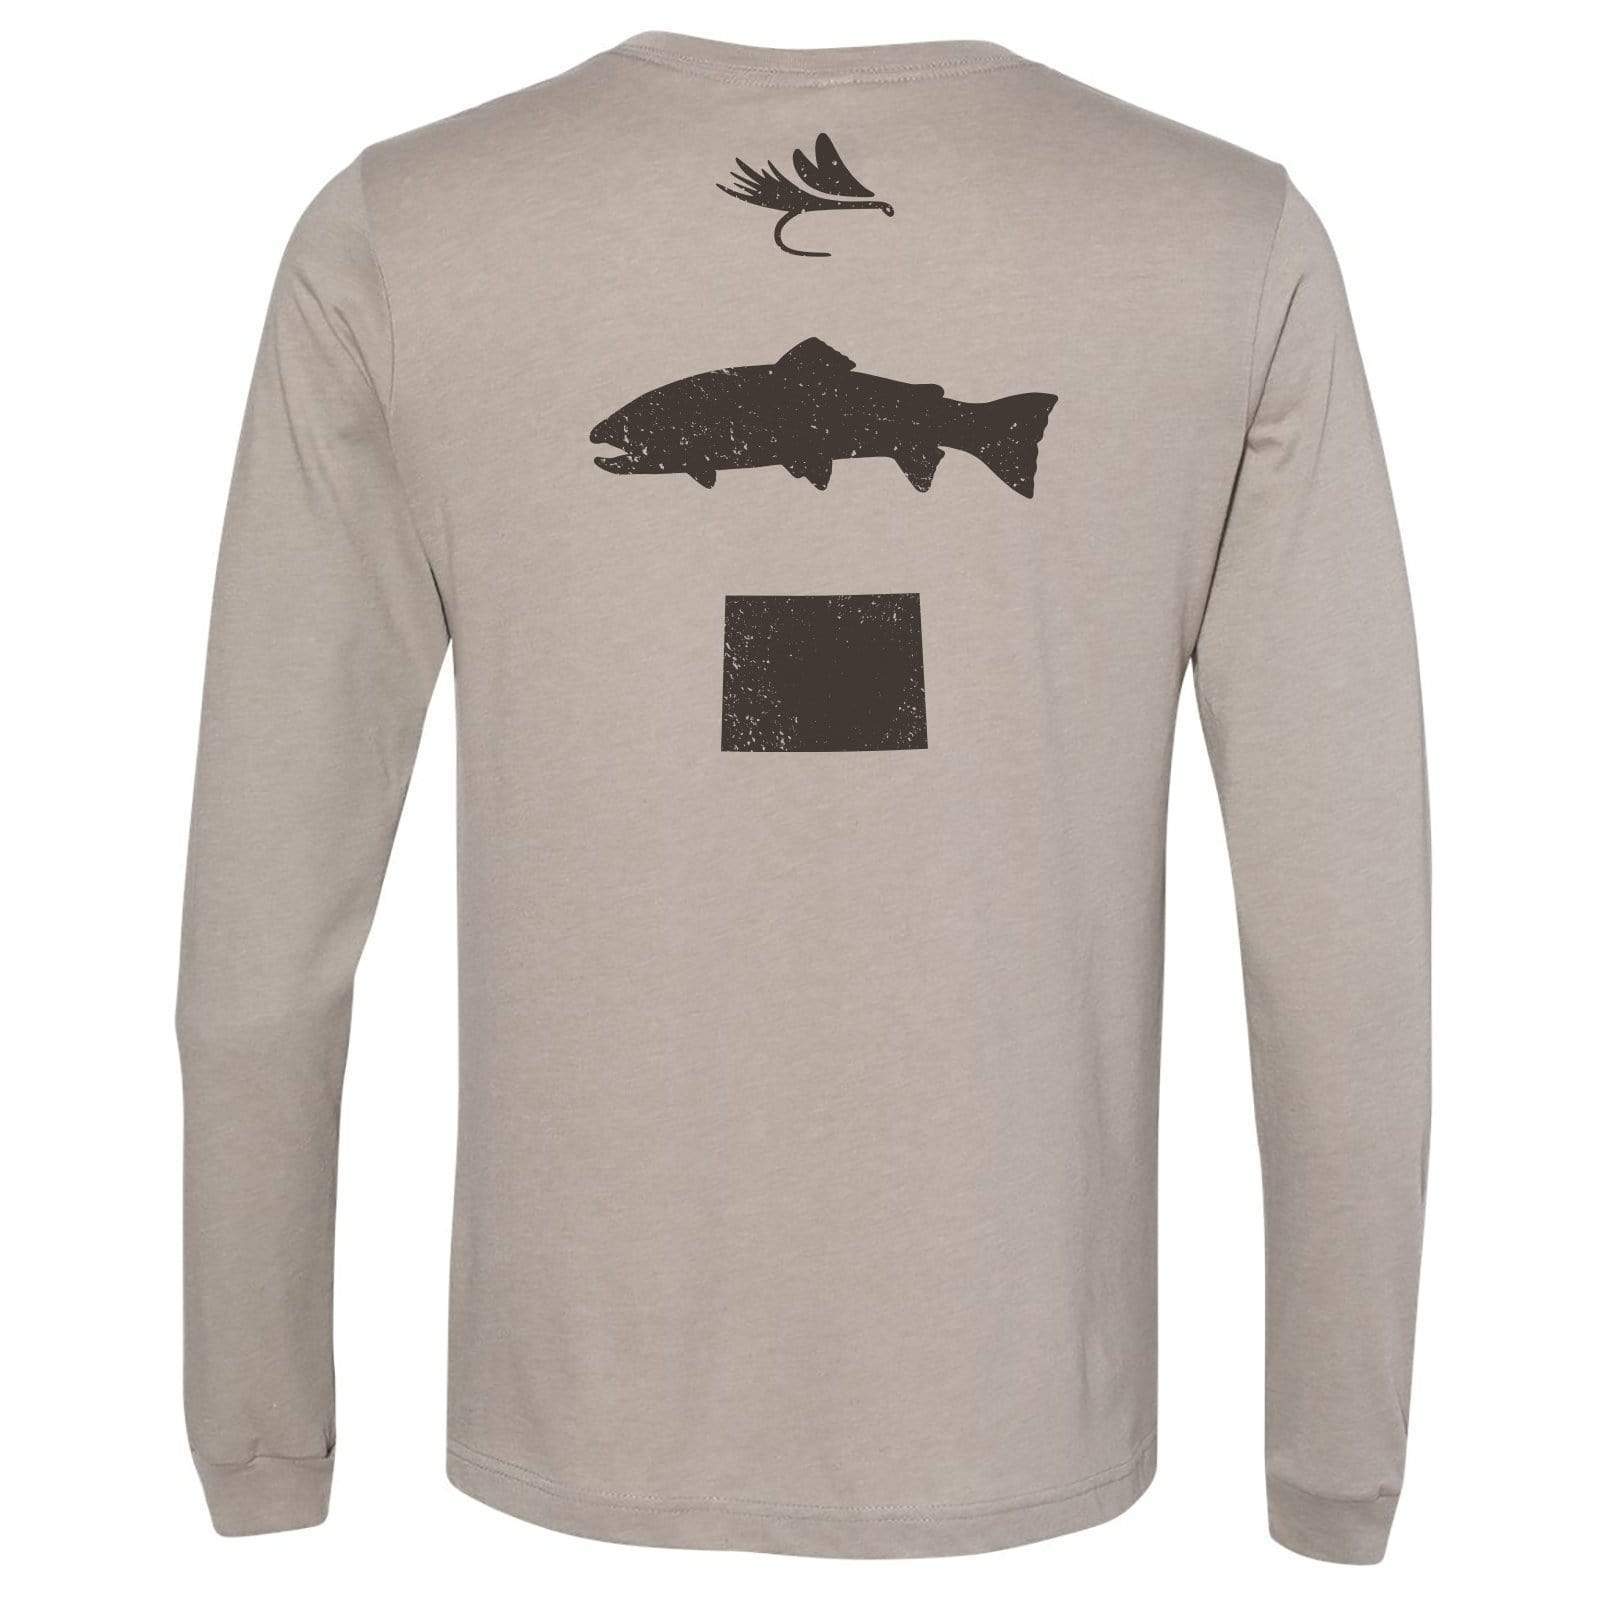 Fly Fish Wyoming Spine Design Long Sleeve - 2.0 2XL / Stone